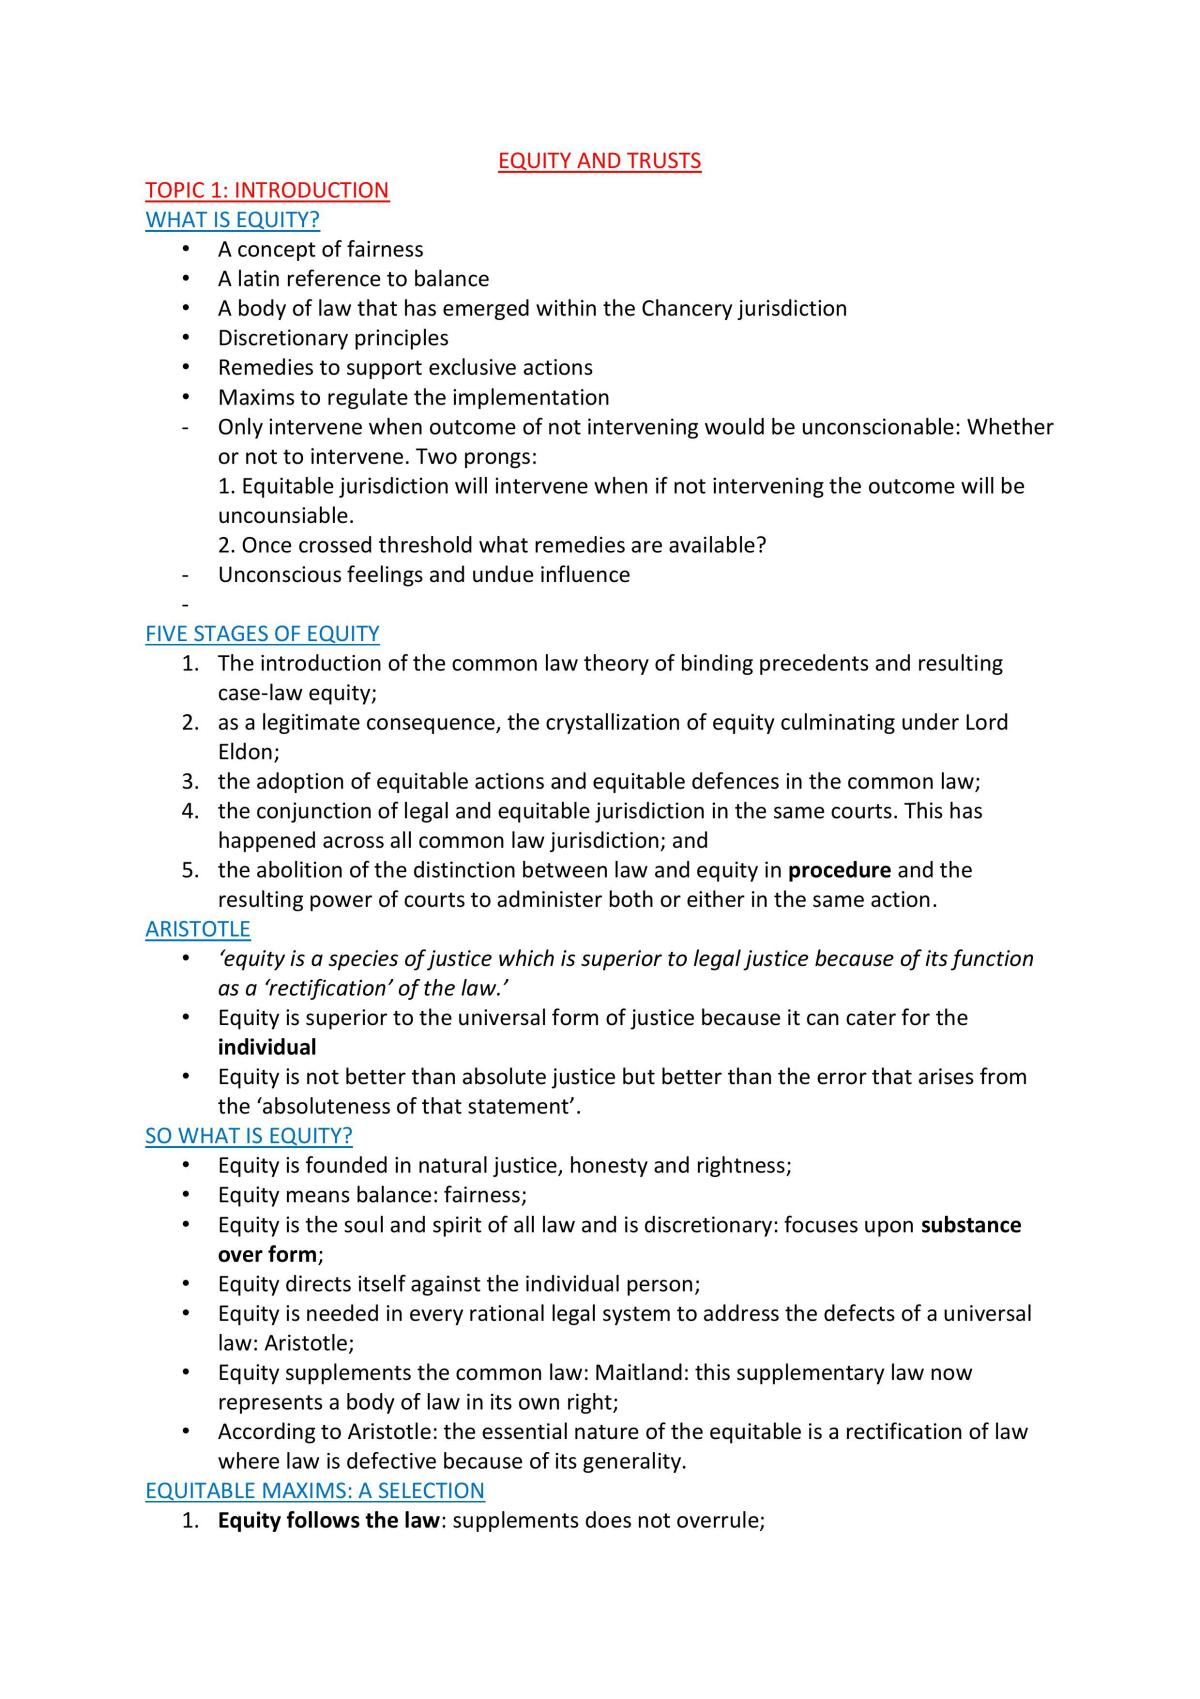 Equity and Trusts - Exam notes full - Page 1